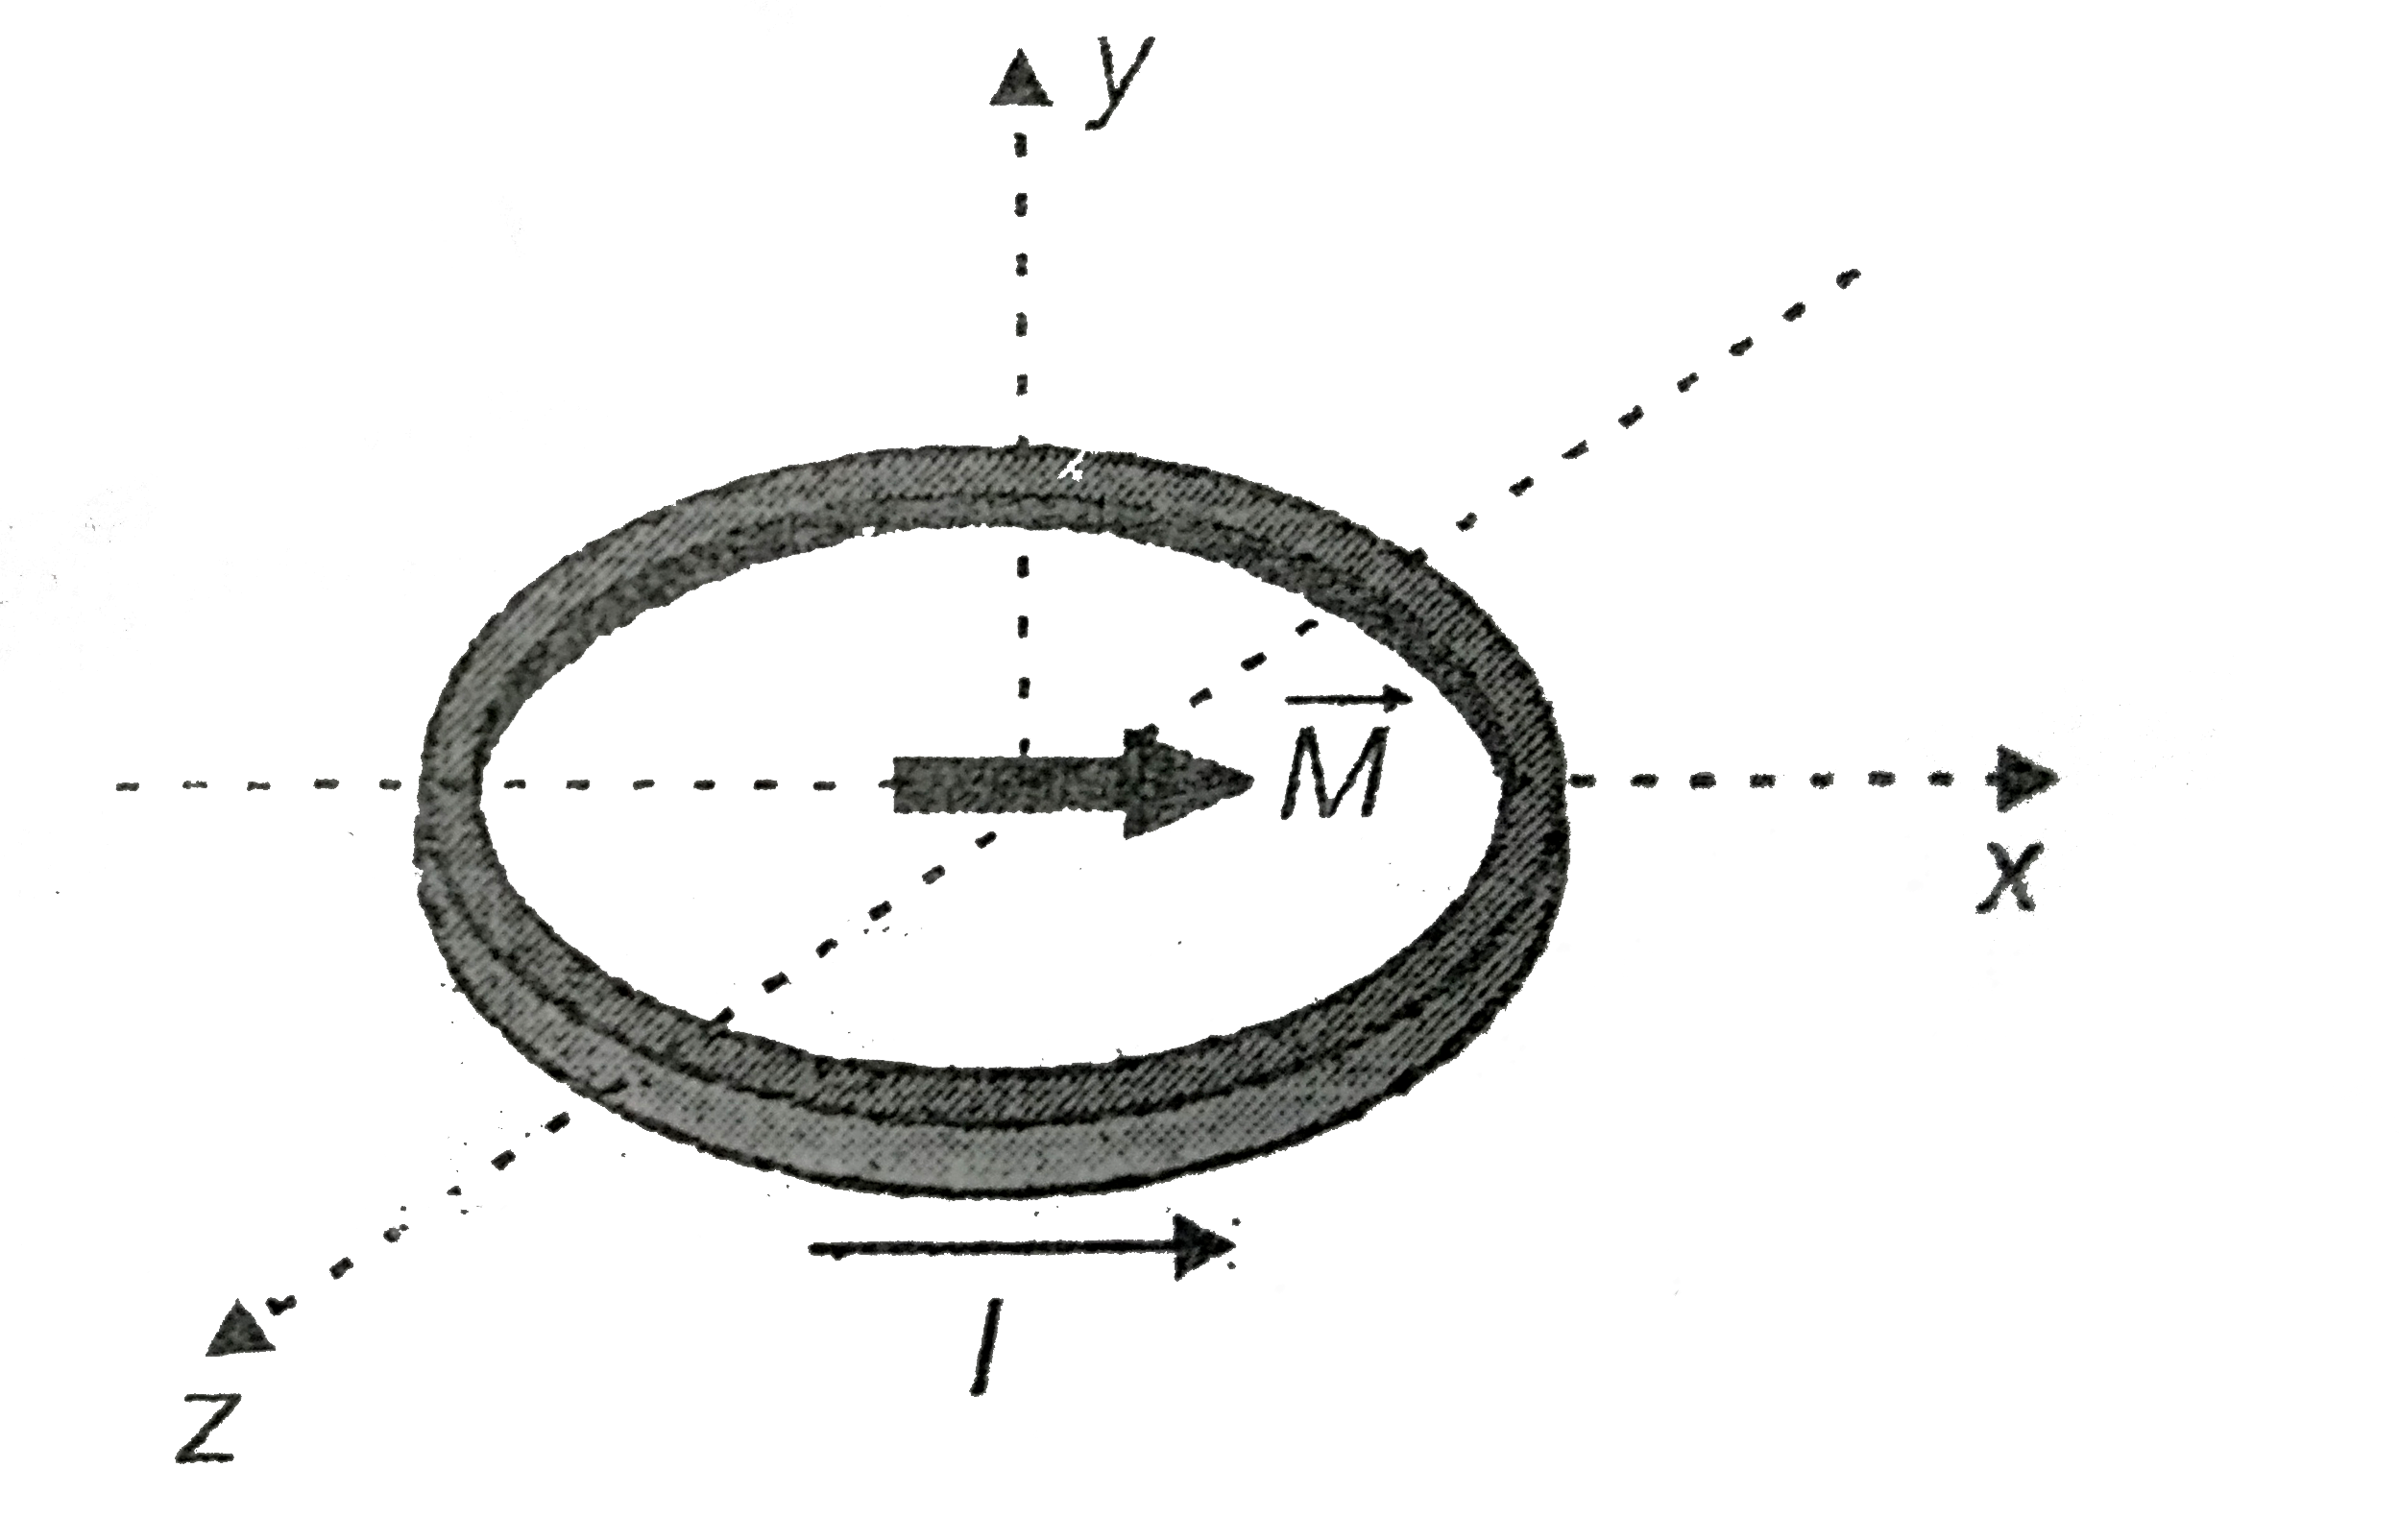 A ring carrying current l lies in x-z plane as shown. A short magnetic dipole with dipole moment directed along x-axis is fixed at origin. If the ring is free to move anywhere, then it will